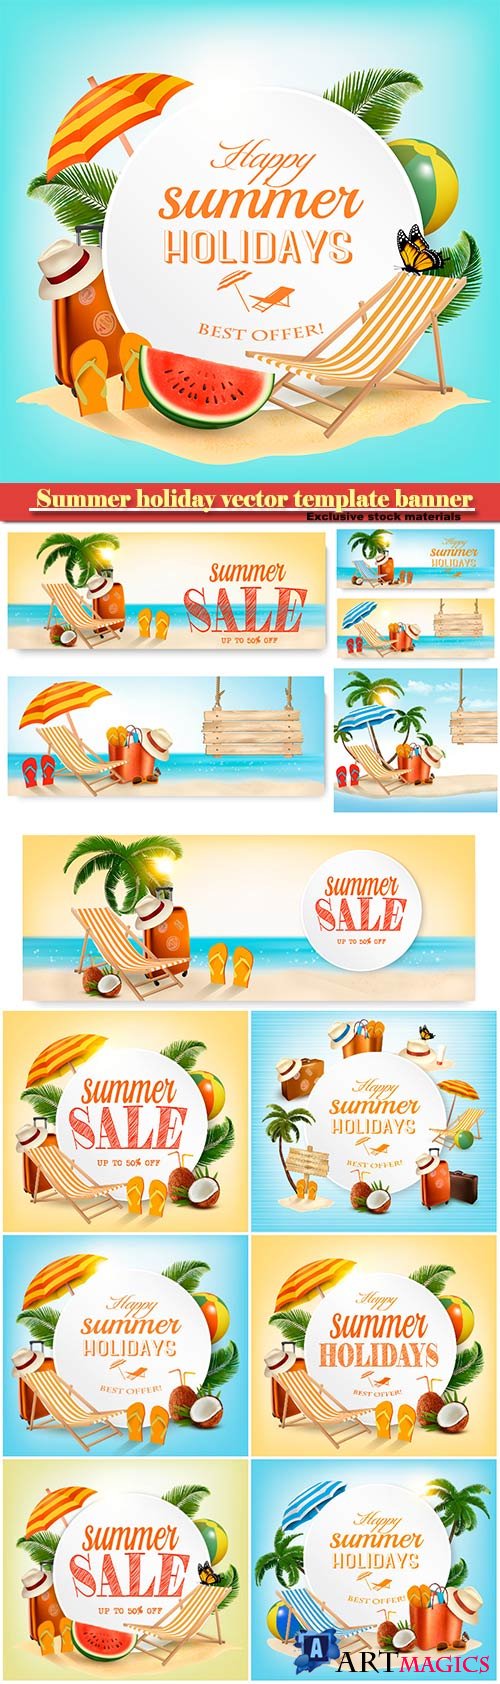 Summer holiday vector template banner